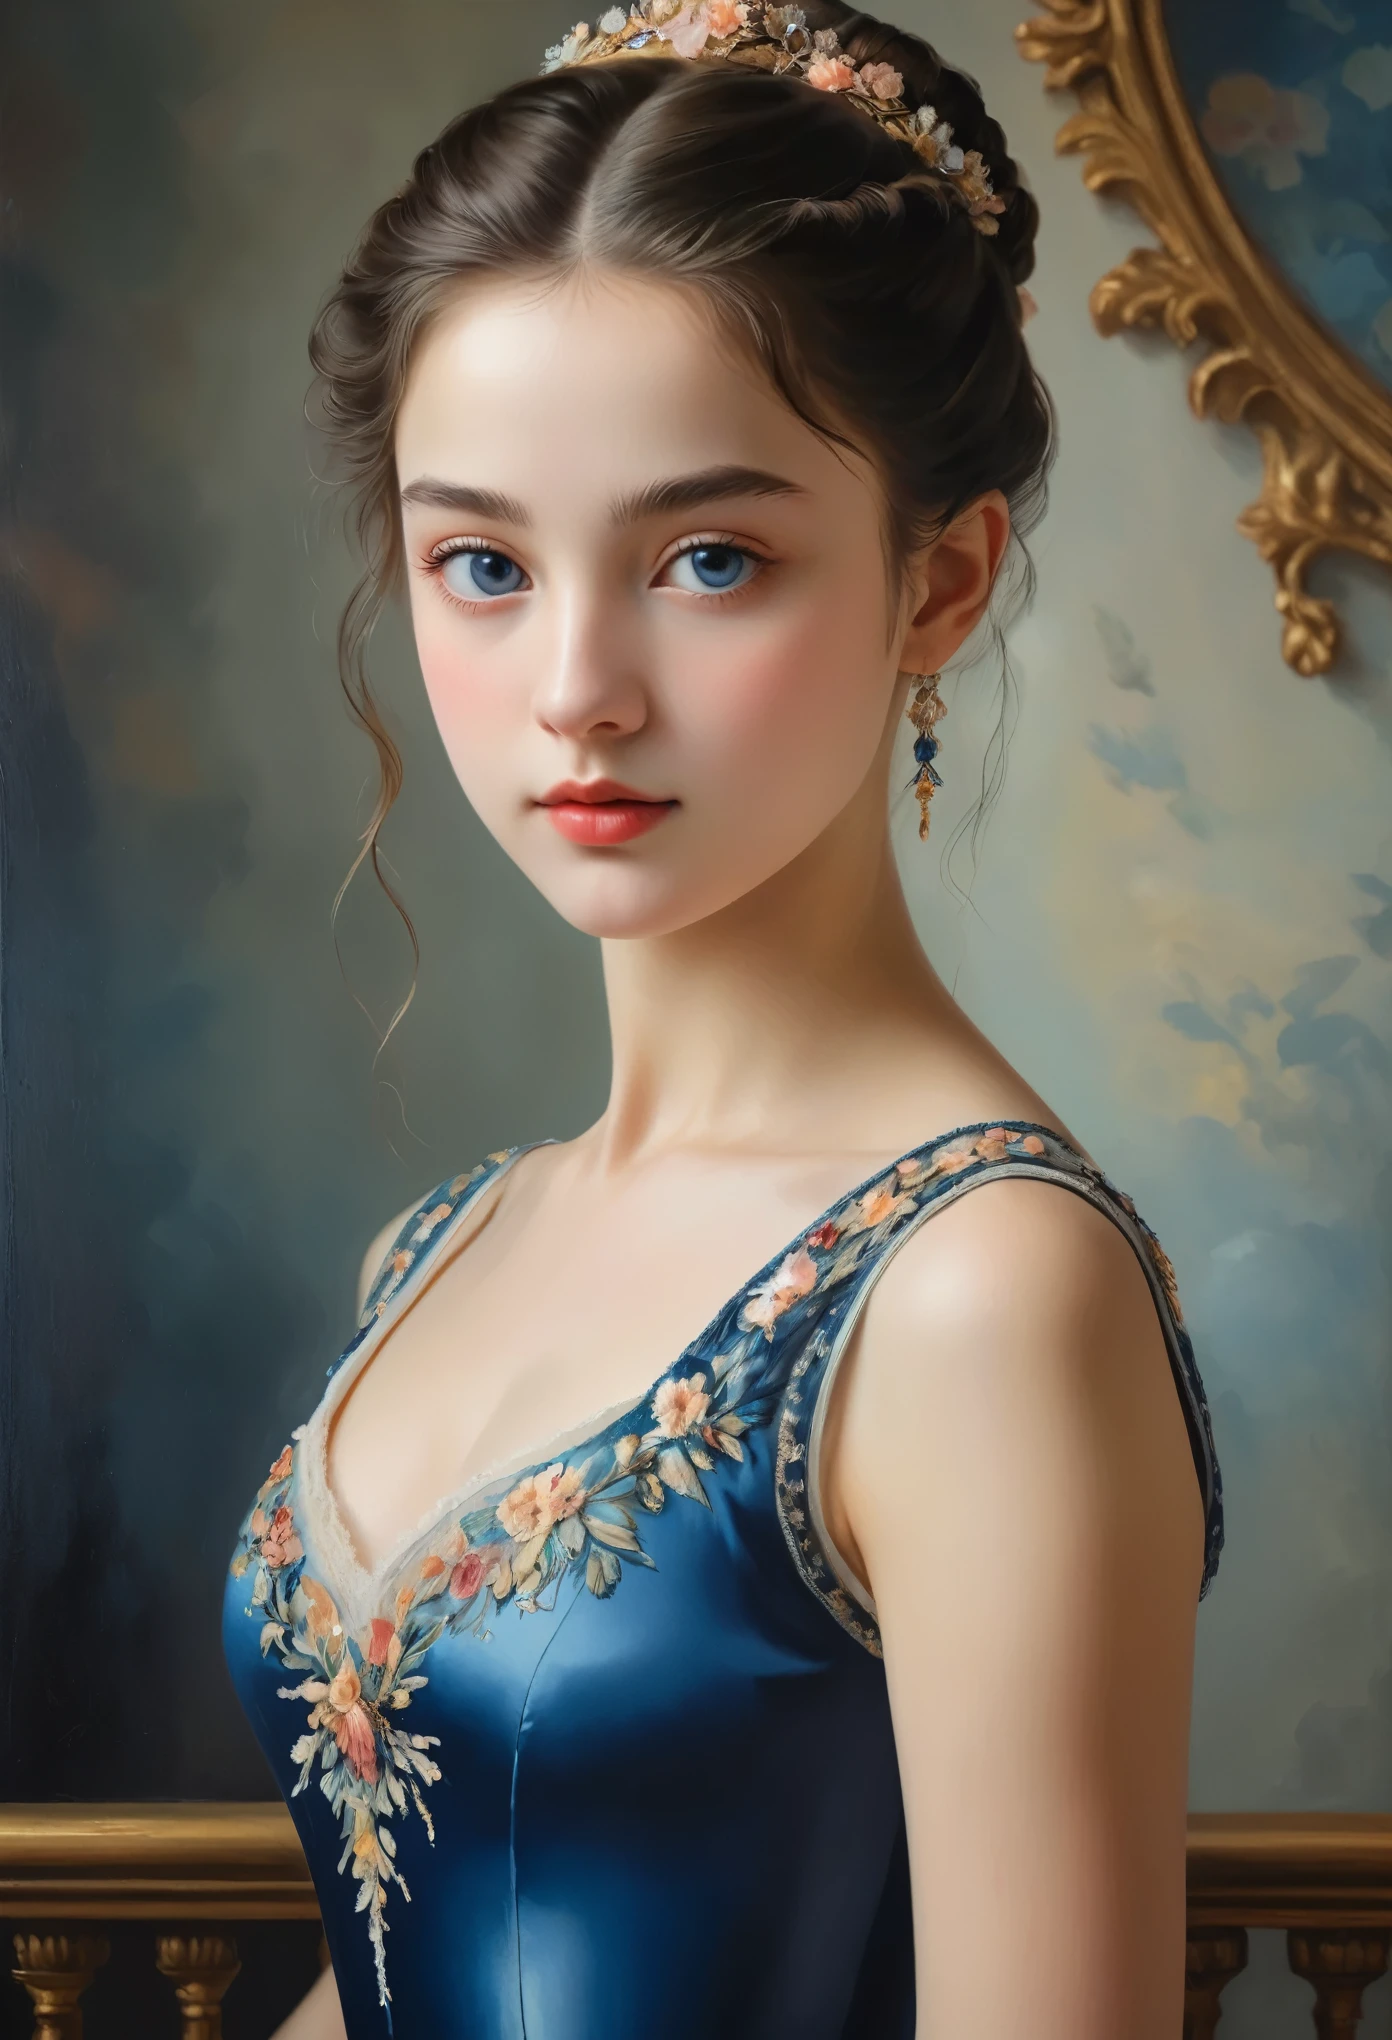 (highres,masterpiece:1.2),(realistic:1.37)"(best quality, highres, ultra-detailed, realistic),beautiful 19th-century portrait of a 16-year-old French ballet dancer, (She is half French and half Japanese, and is a stunning beauty with dark blue eyes and a high nose:1.1), elaborate ballet costume, detailed facial features, long graceful neck, flowing locks of hair, poised and elegant posture, soft and delicate lighting, classic oil painting medium, vibrant colors, subtle background with floral motifs", dreamy atmosphere, Surrealism,mystical aura